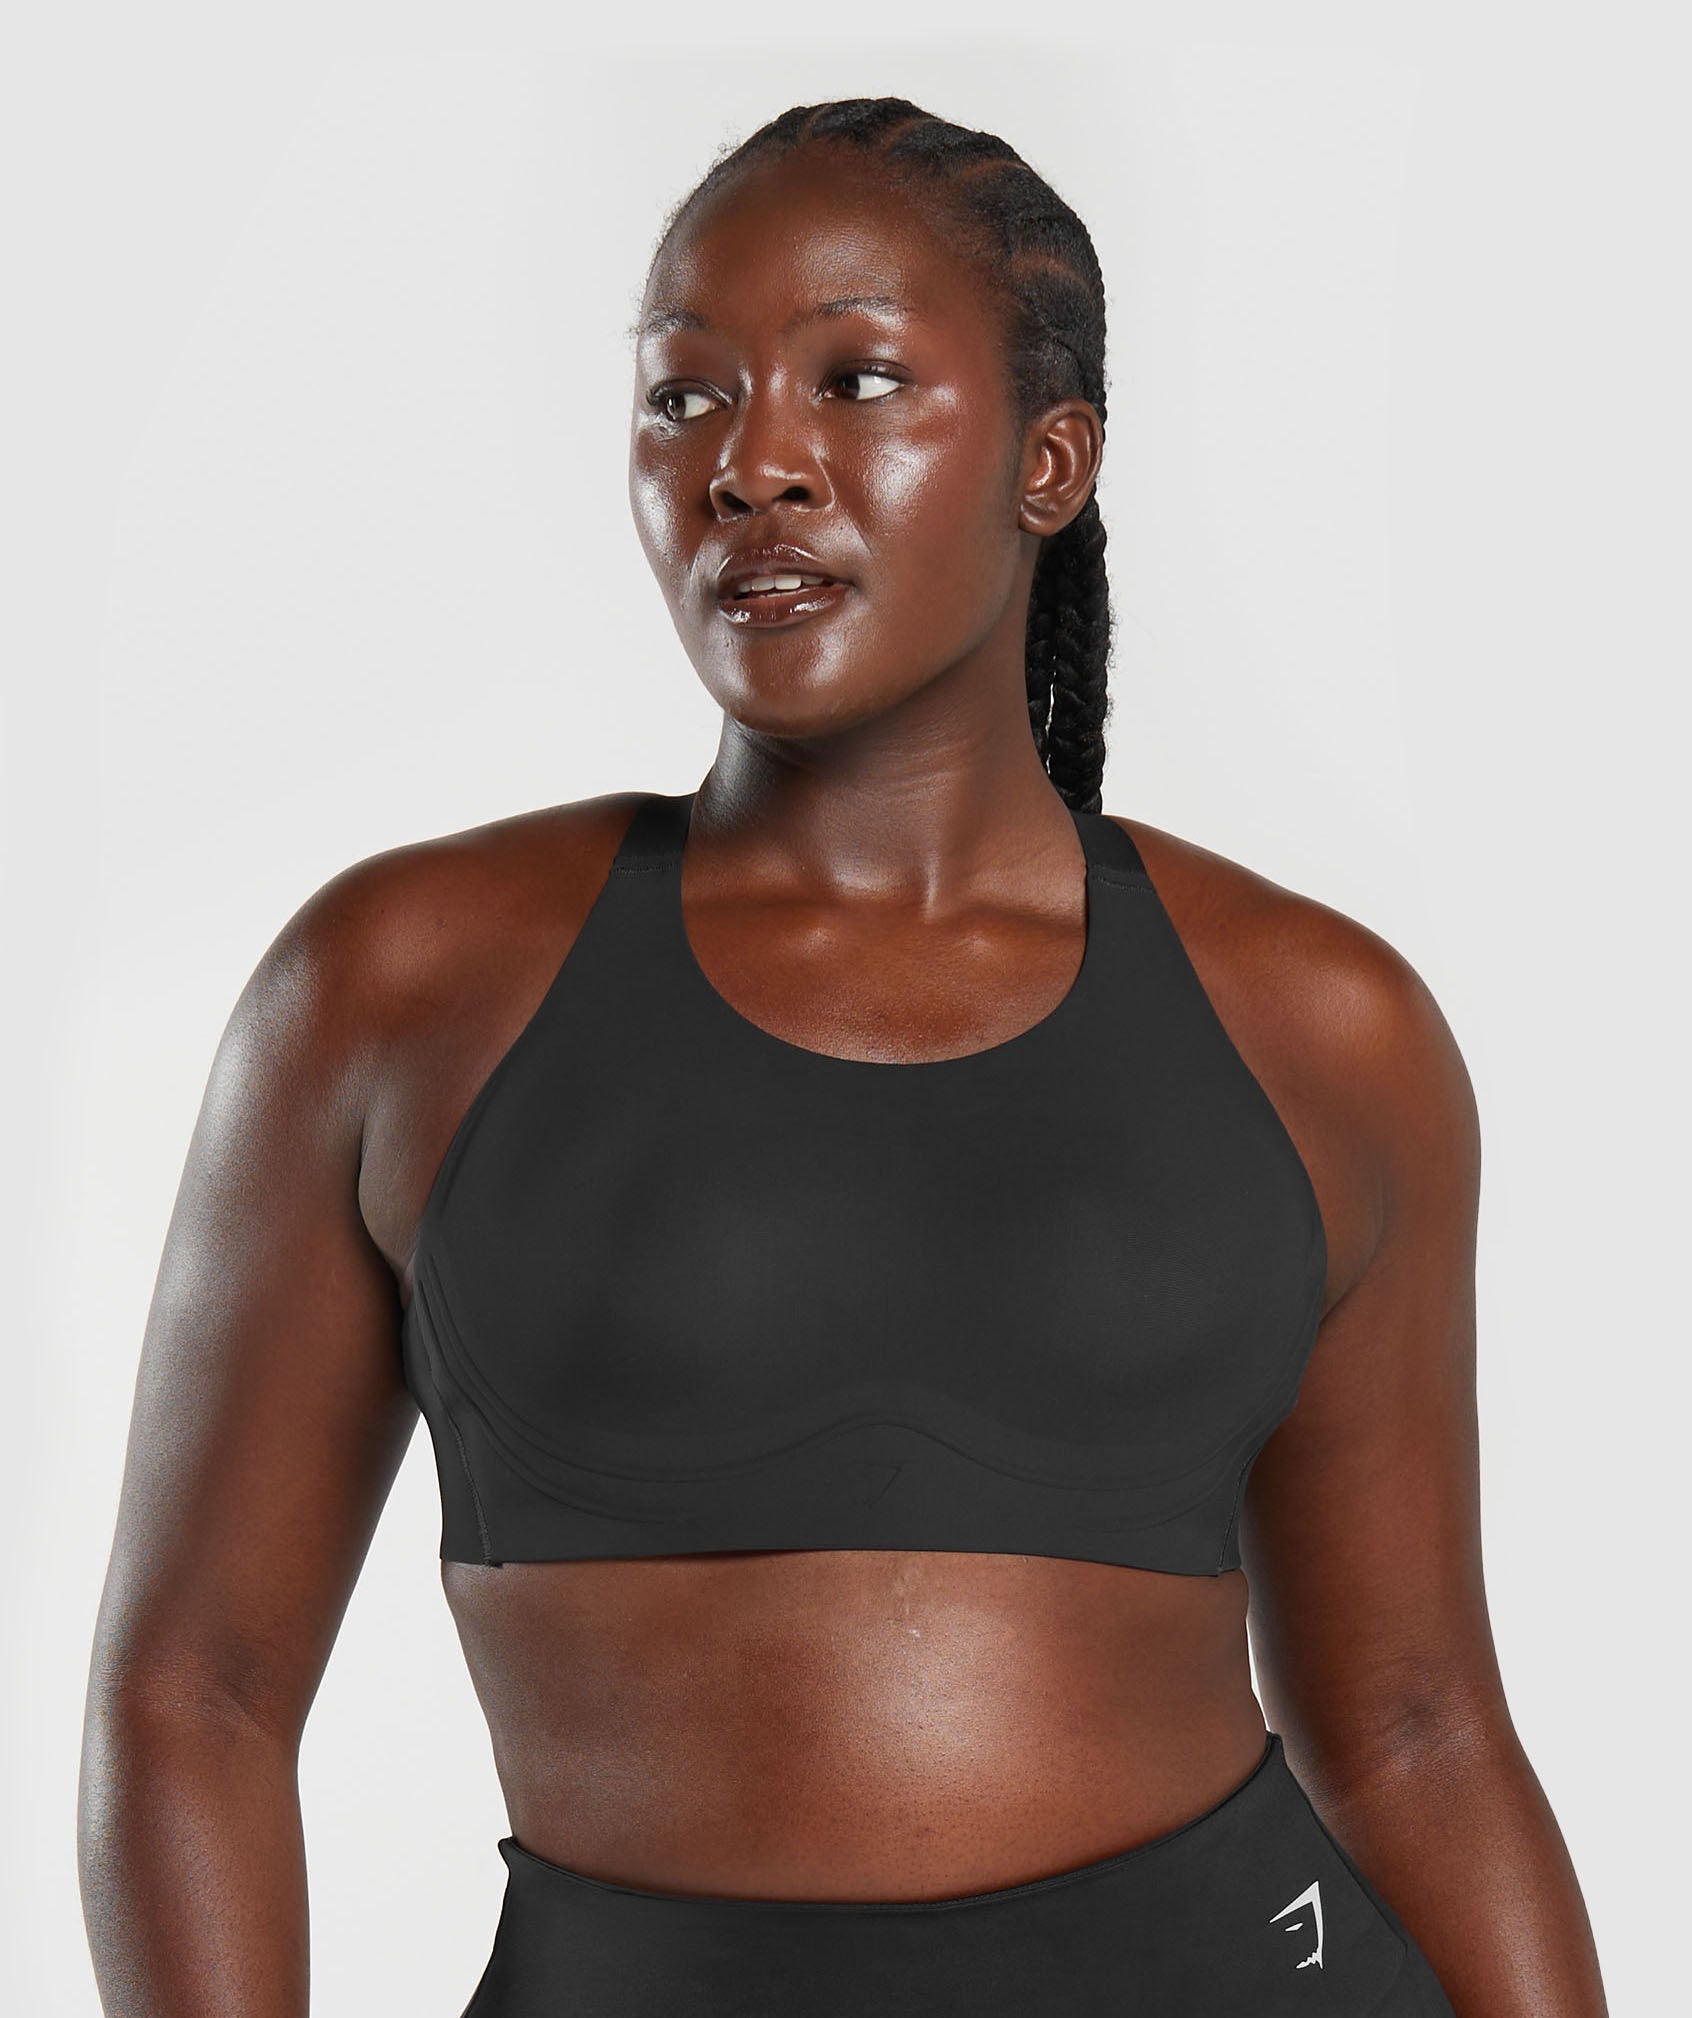 New Orleans Longline Women's High Impact Sports Bra exclusive at